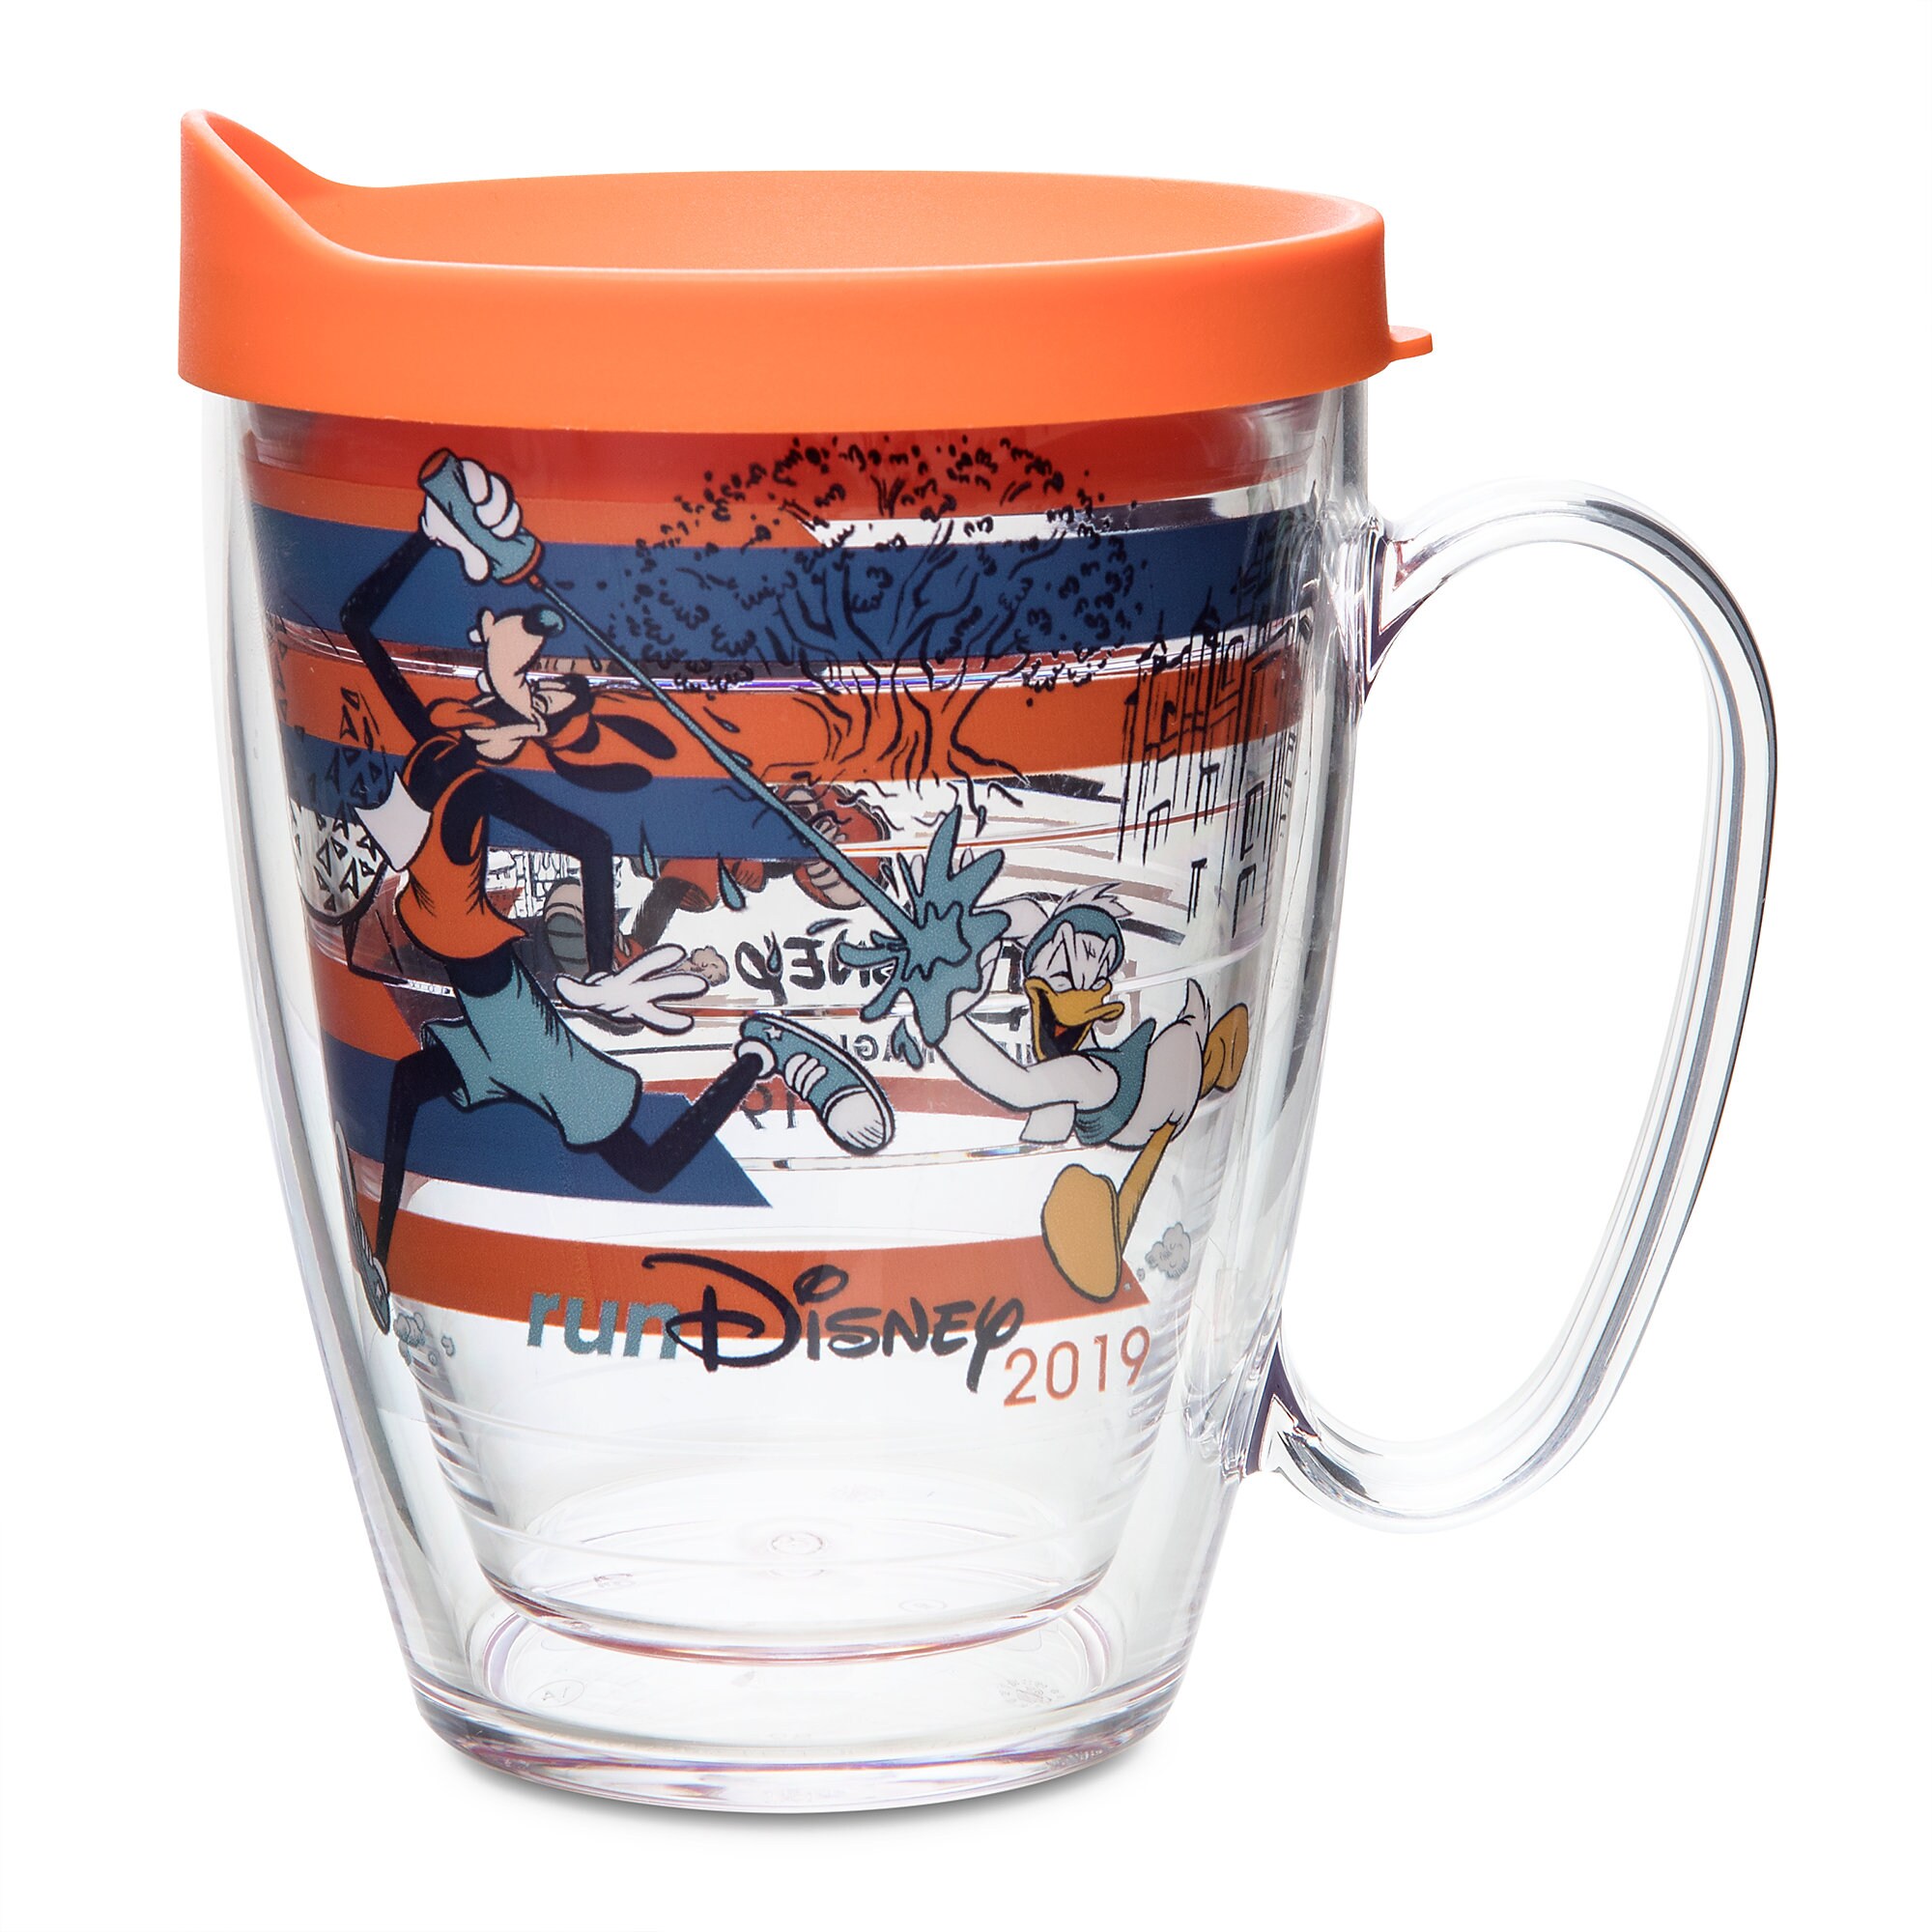 Mickey Mouse and Friends runDisney Travel Mug by Tervis - 2019